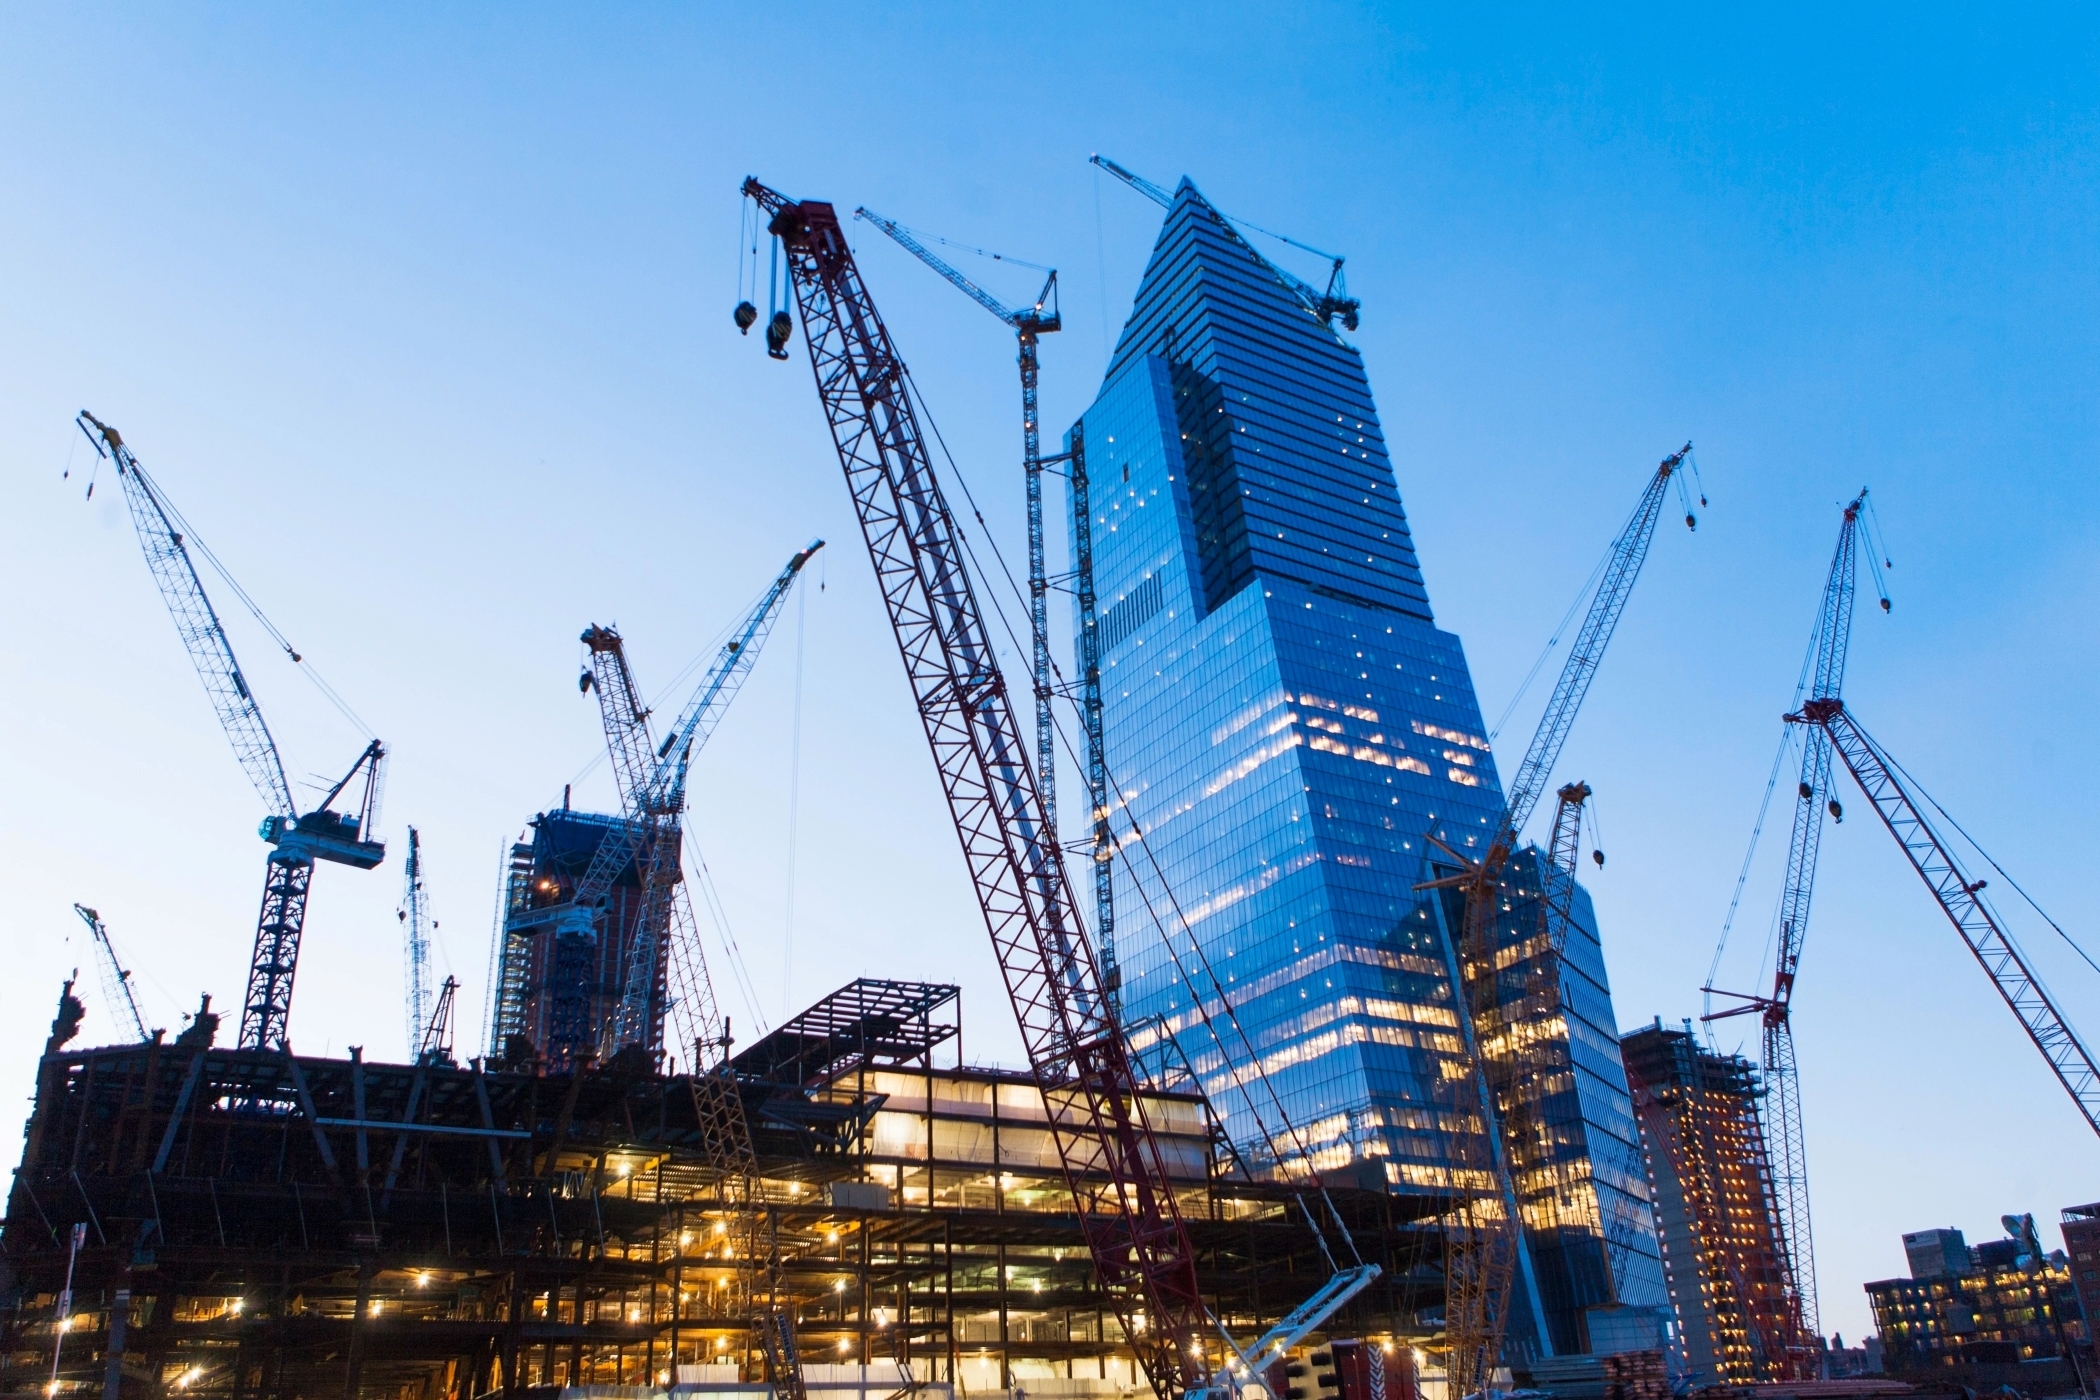 Construction material costs are expected to remain high by historical standards in the next two years and beyond, even as pandemic supply chain disruptions ease, according to Oxford Economics. (Getty Images)